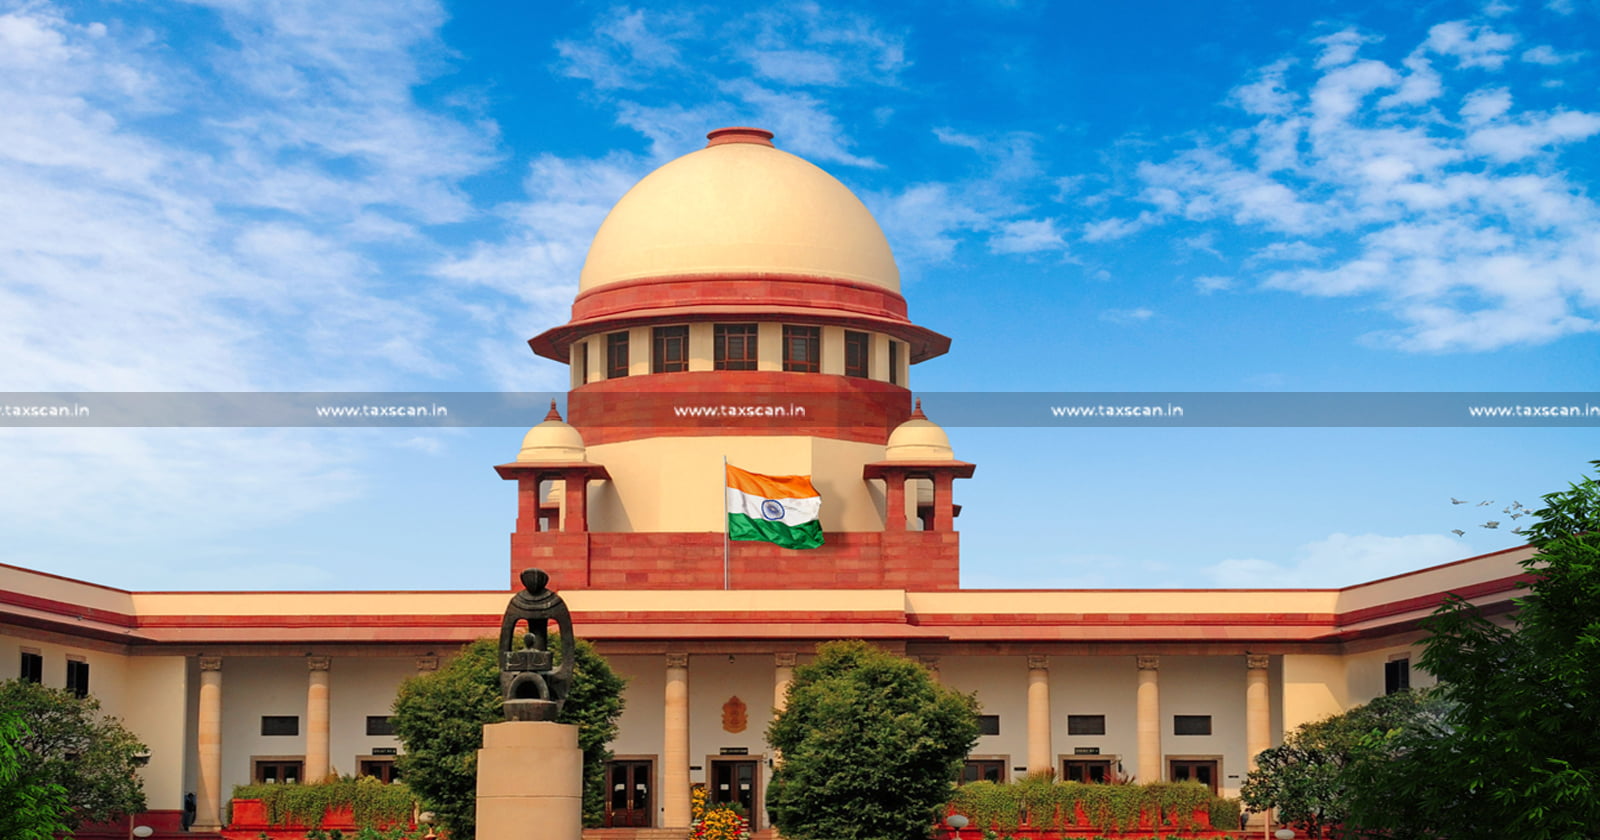 Extended Period - Limitation to Central Excise Dept for Recovery of Dues and Receiving Penalty - SC Directs to Hear Parties - TAXSCAN